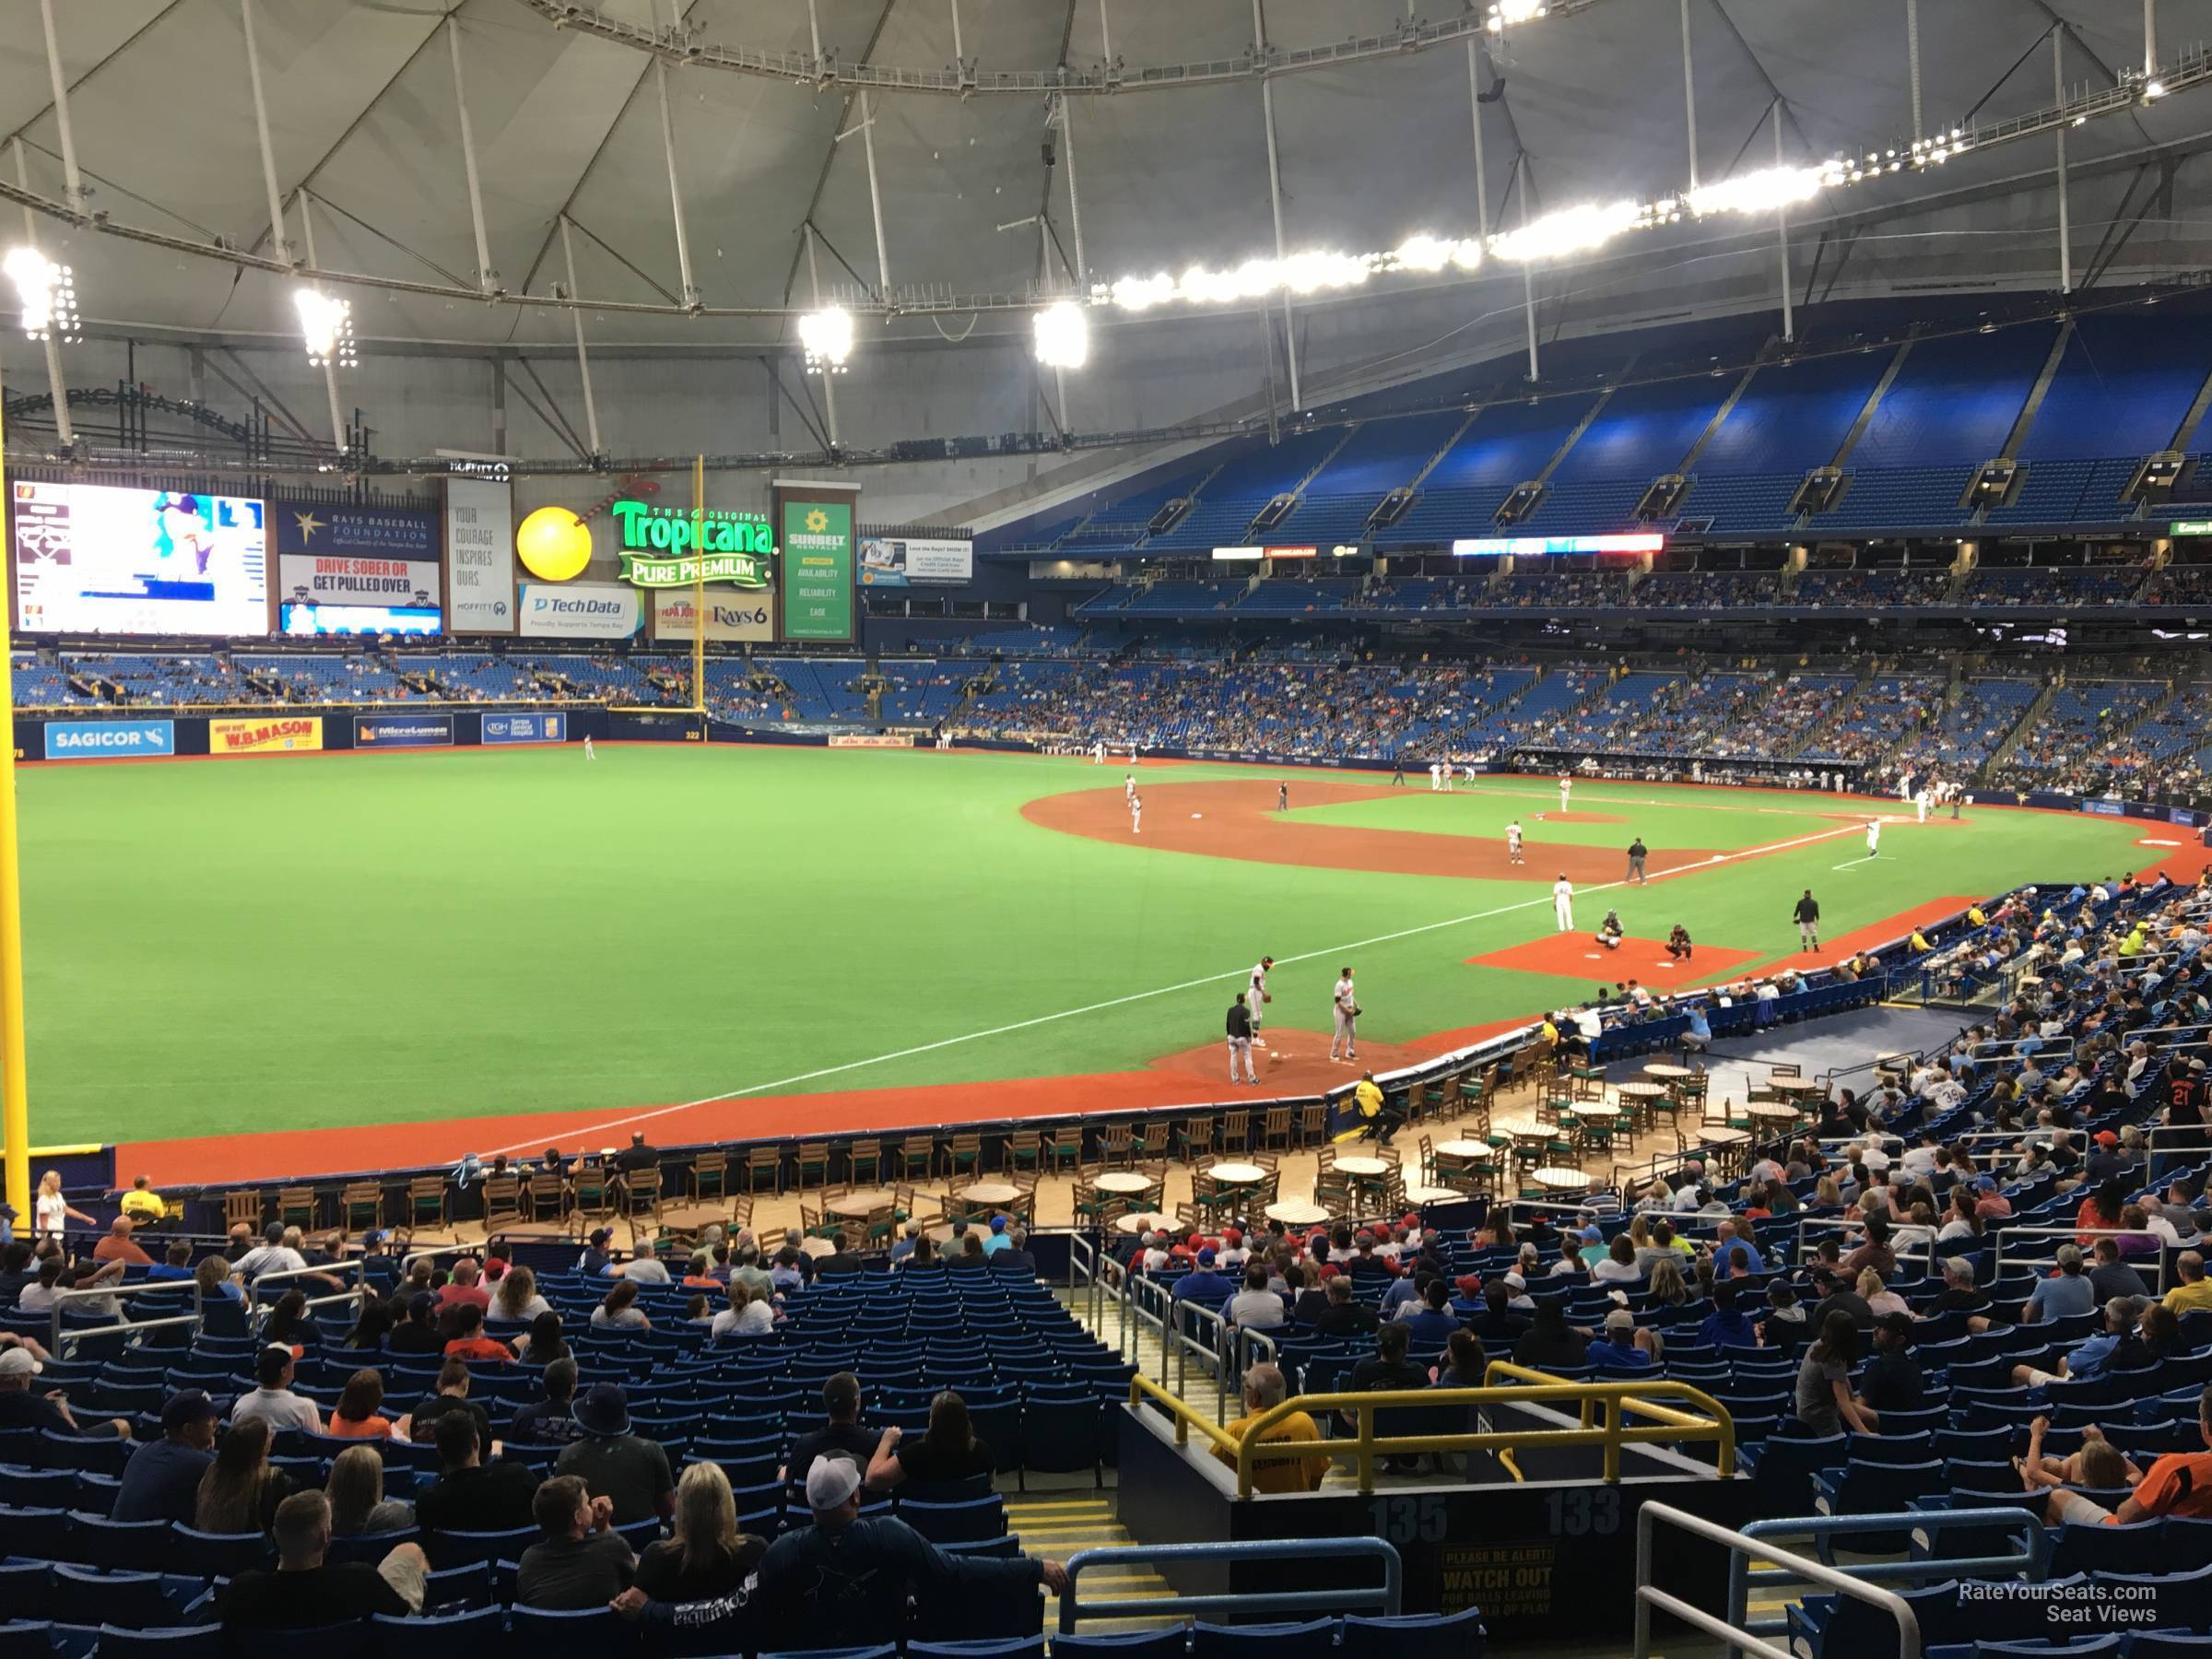 section 135, row jj seat view  for baseball - tropicana field